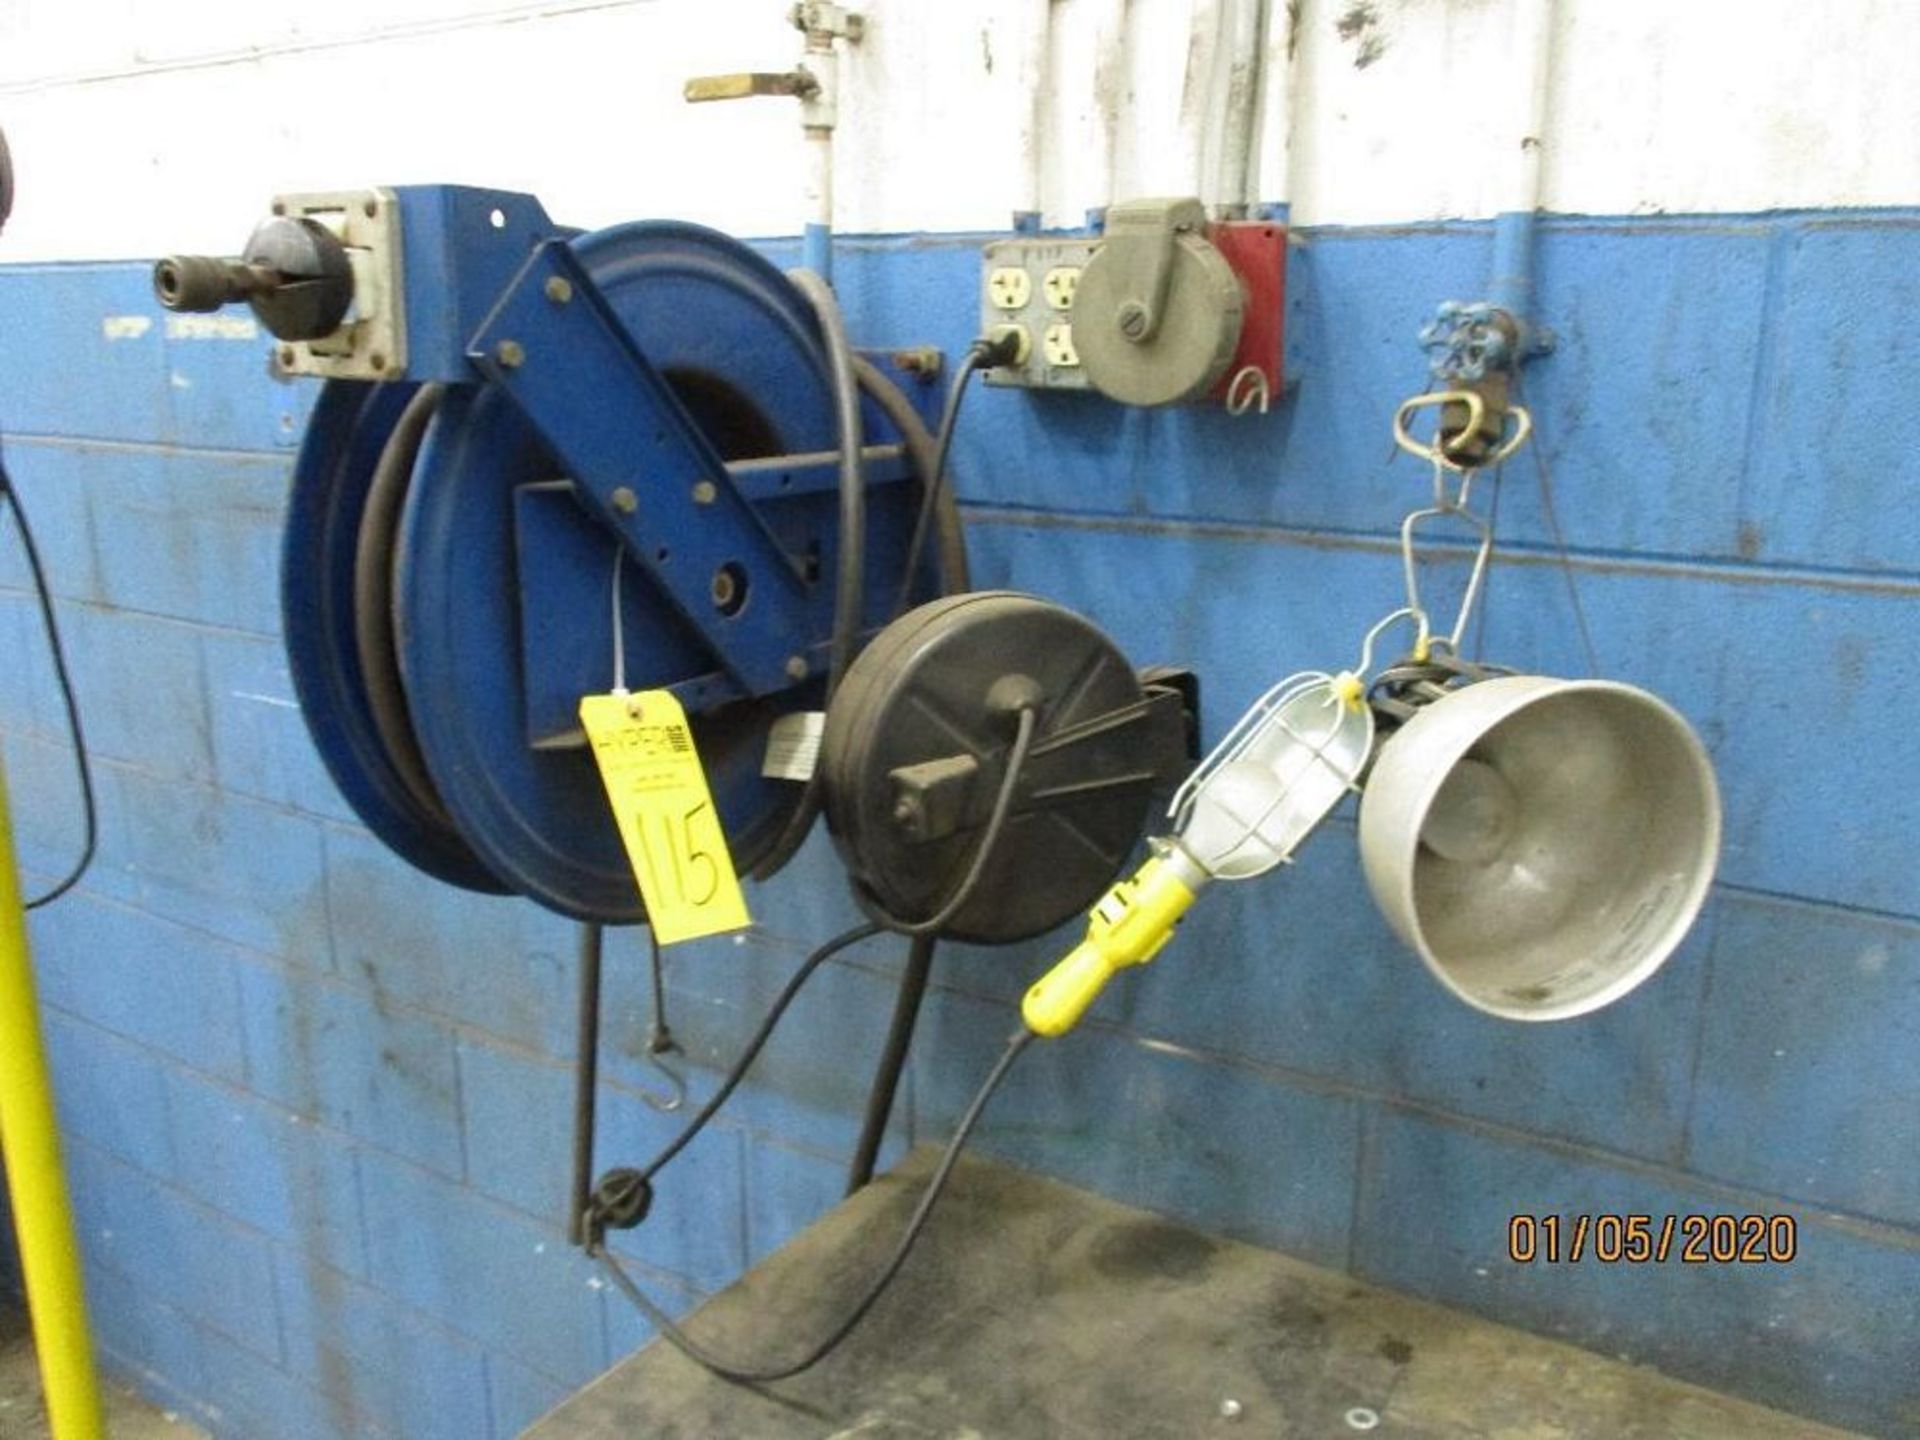 Coxwell Hose Reel And 50' Electrical Cord Reel With Work Light